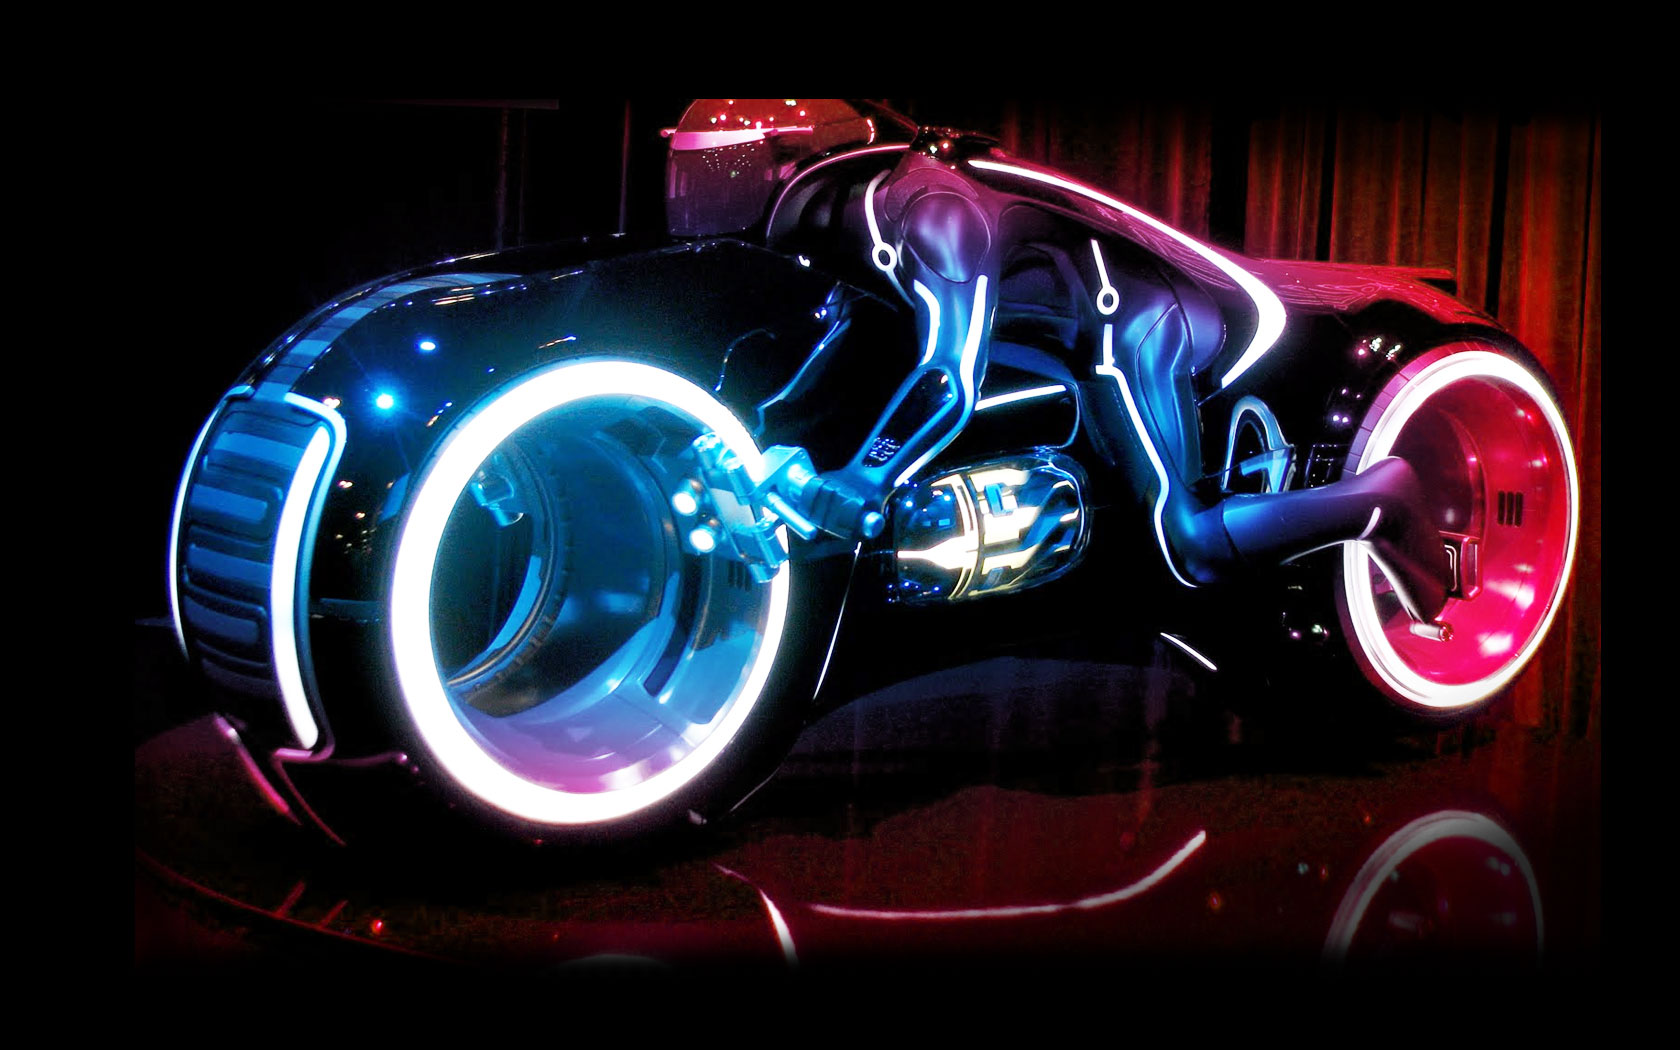 Motorcycles Of The Future Wallpapers